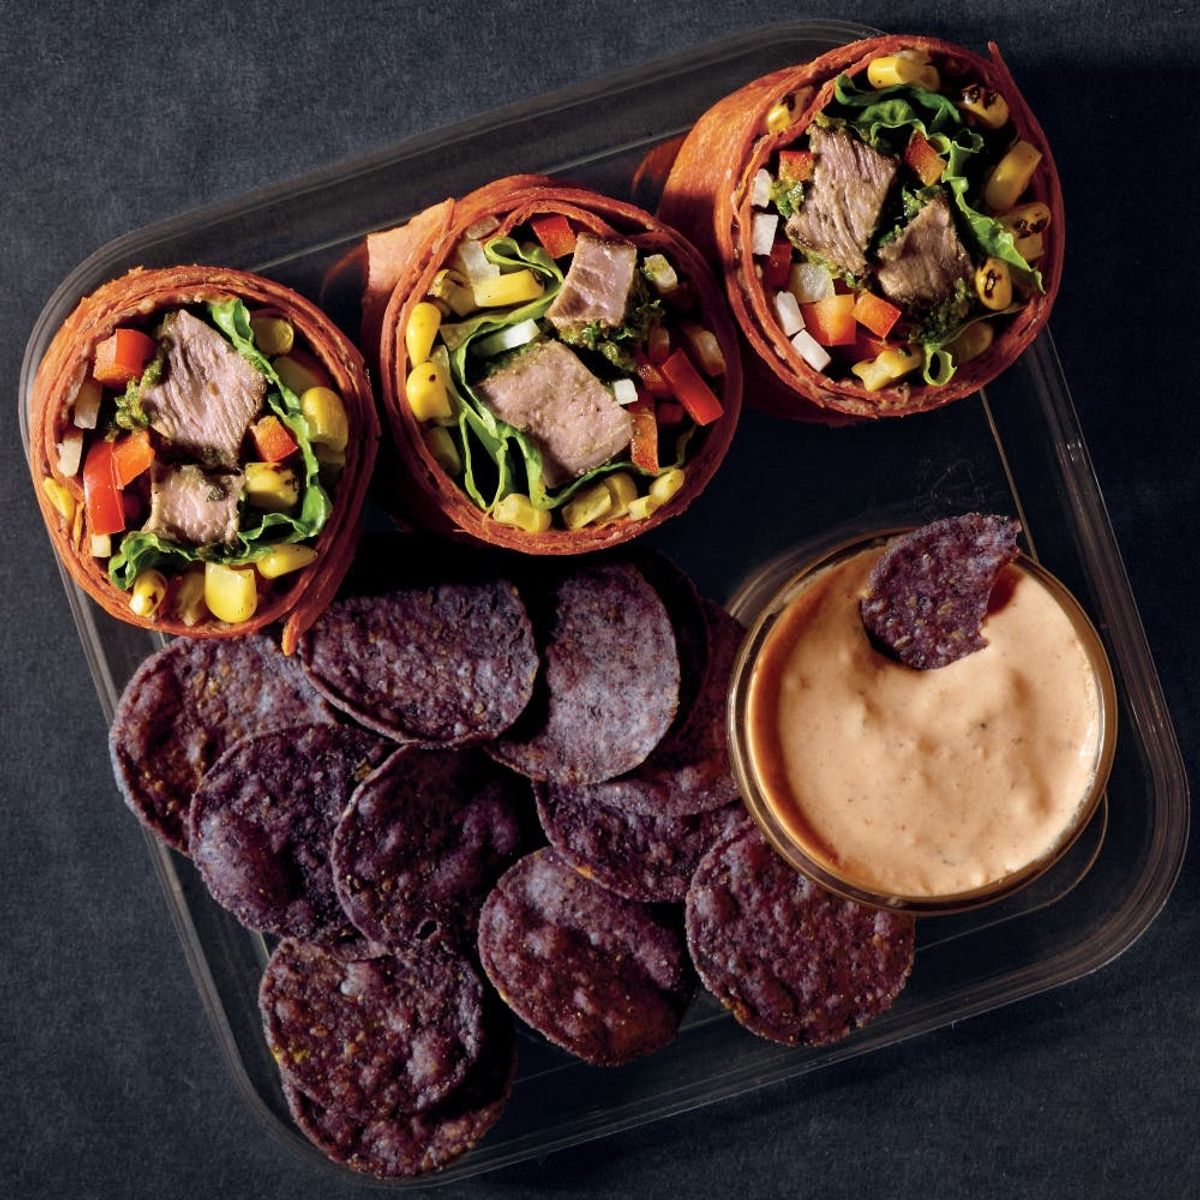 Starbucks’ Bold New Wraps and Sweet Selections Are Snacktime Perfection